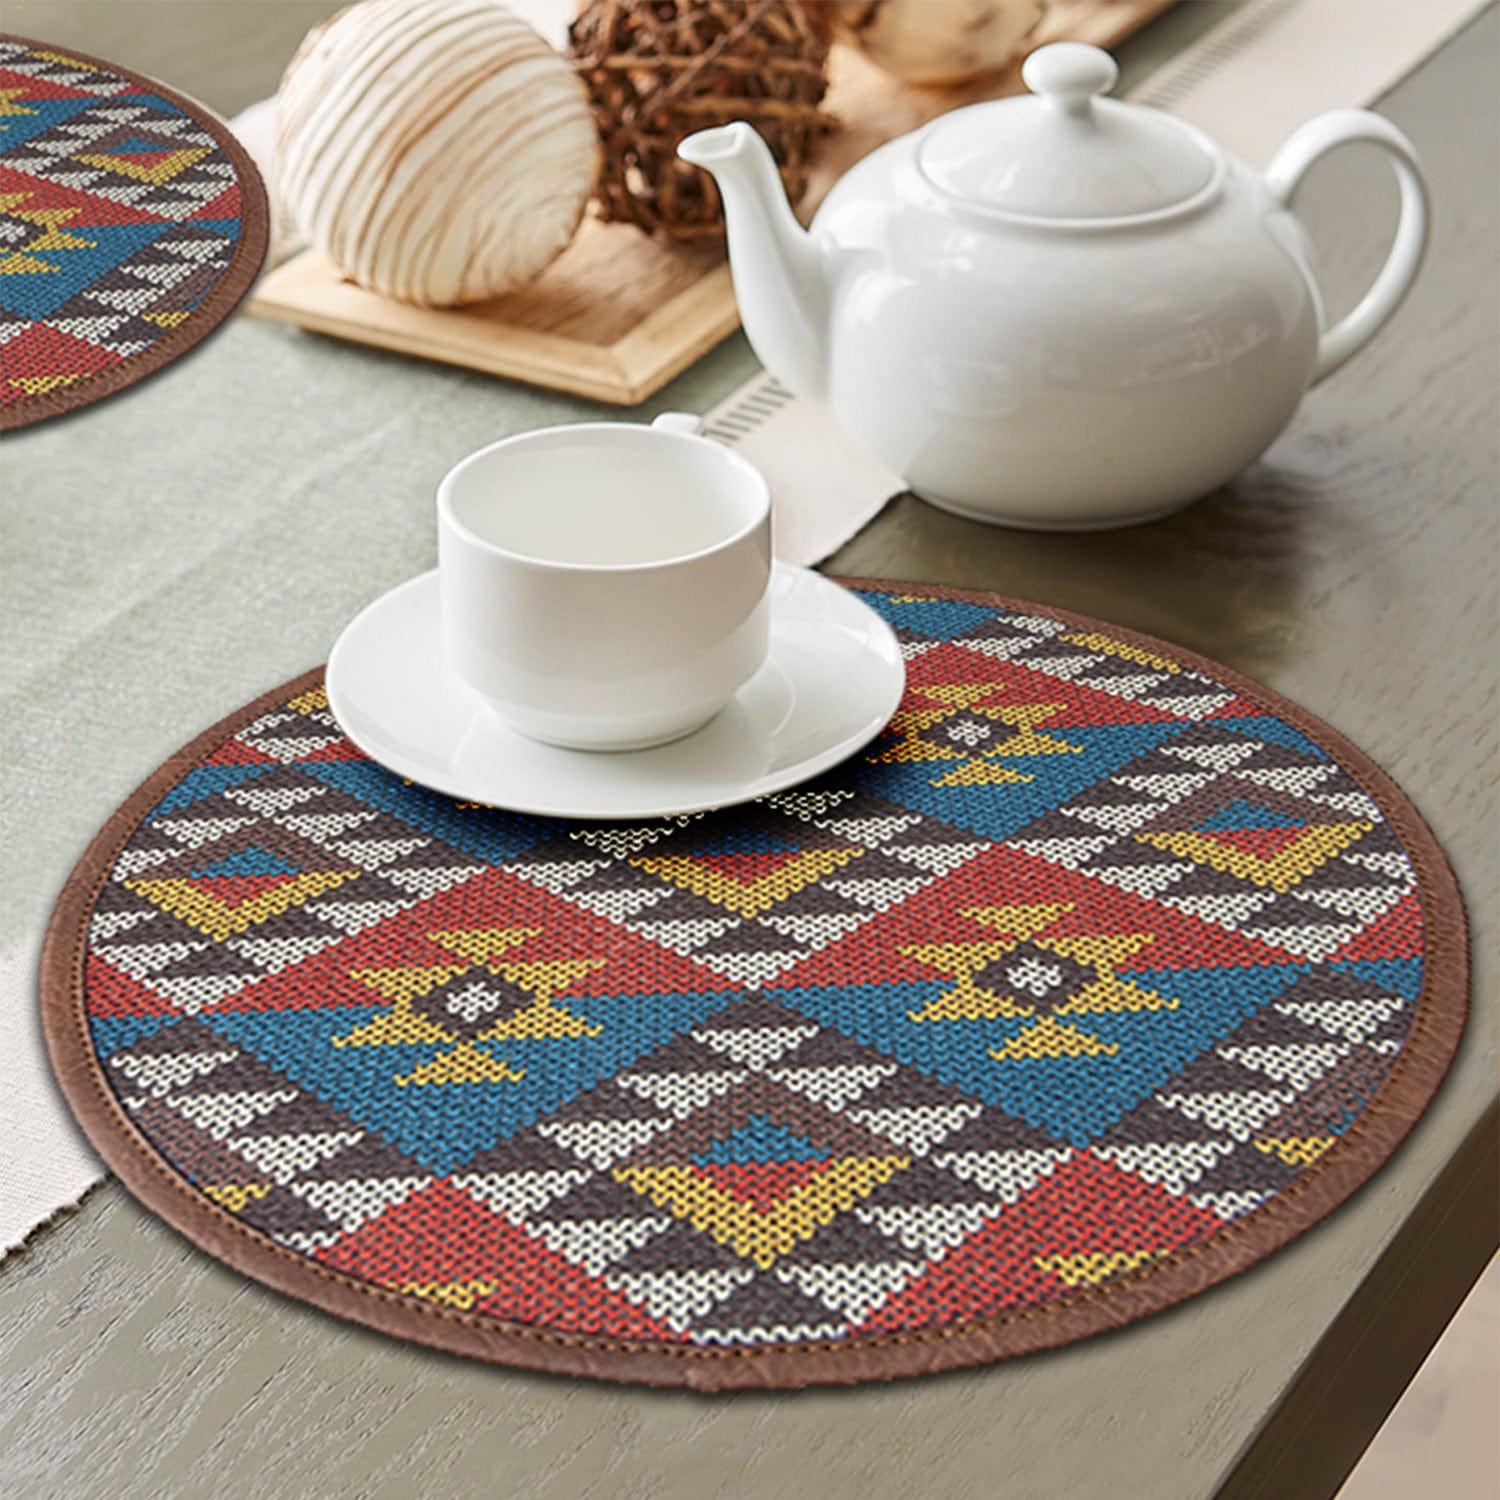 Mona B Set of 2 Printed Mosaic Placemats, 13 INCH Round, Best for Bed-Side Table/Center Table, Dining Table/Shelves (Saffiano) - Placemat by Mona-B - Backpack, Flat30, New Arrivals, Sale, 